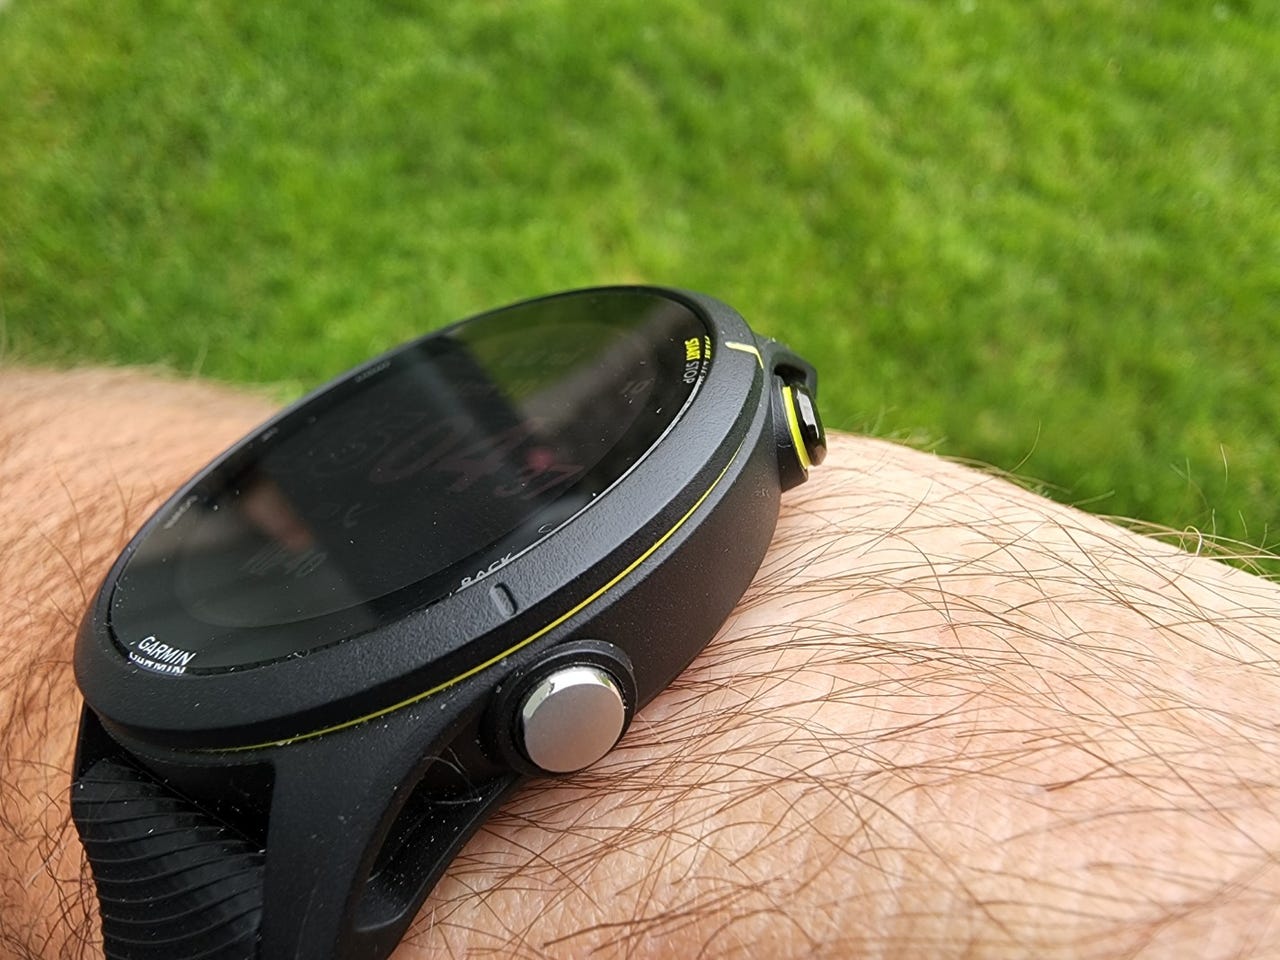 Garmin Forerunner 255 review: Running back to the top - Android